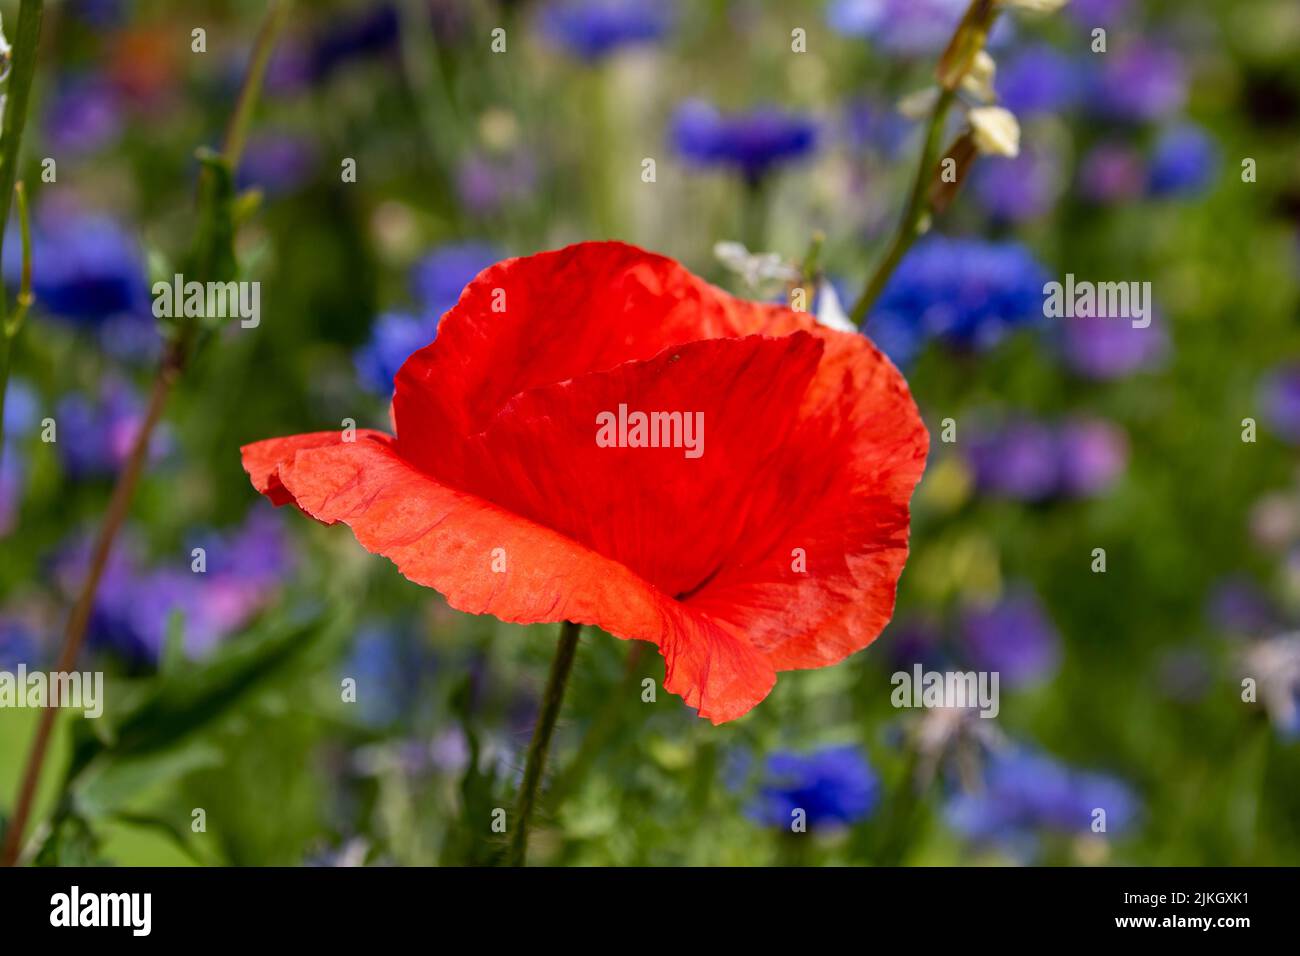 beautiful bright red poppy with blurred vivid blue cornflowers in the background Stock Photo